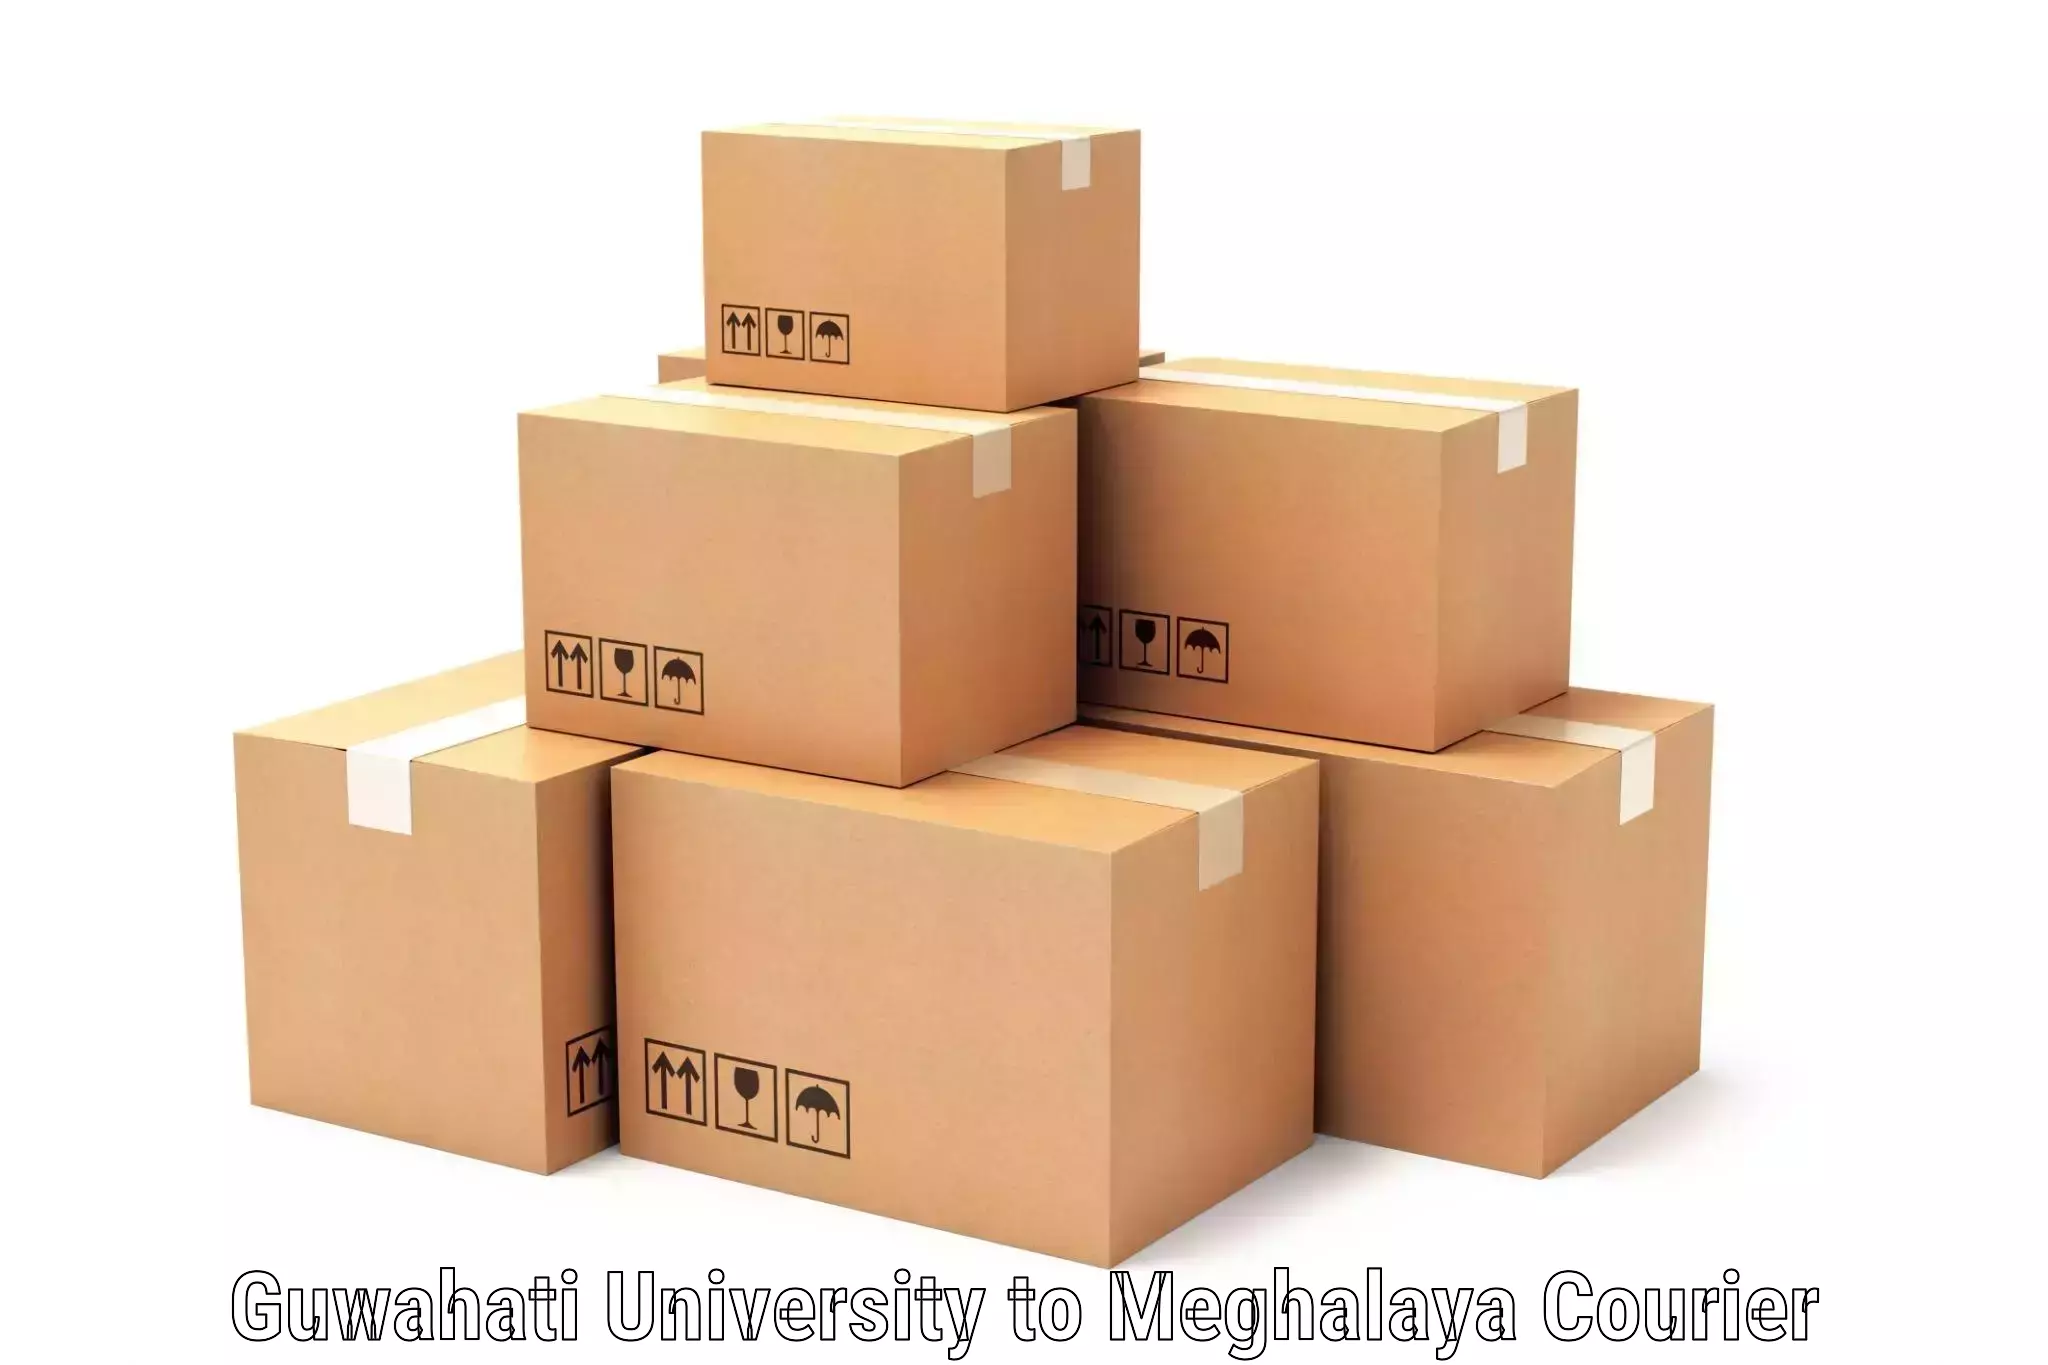 Urban courier service Guwahati University to North Eastern Hill University Shillong